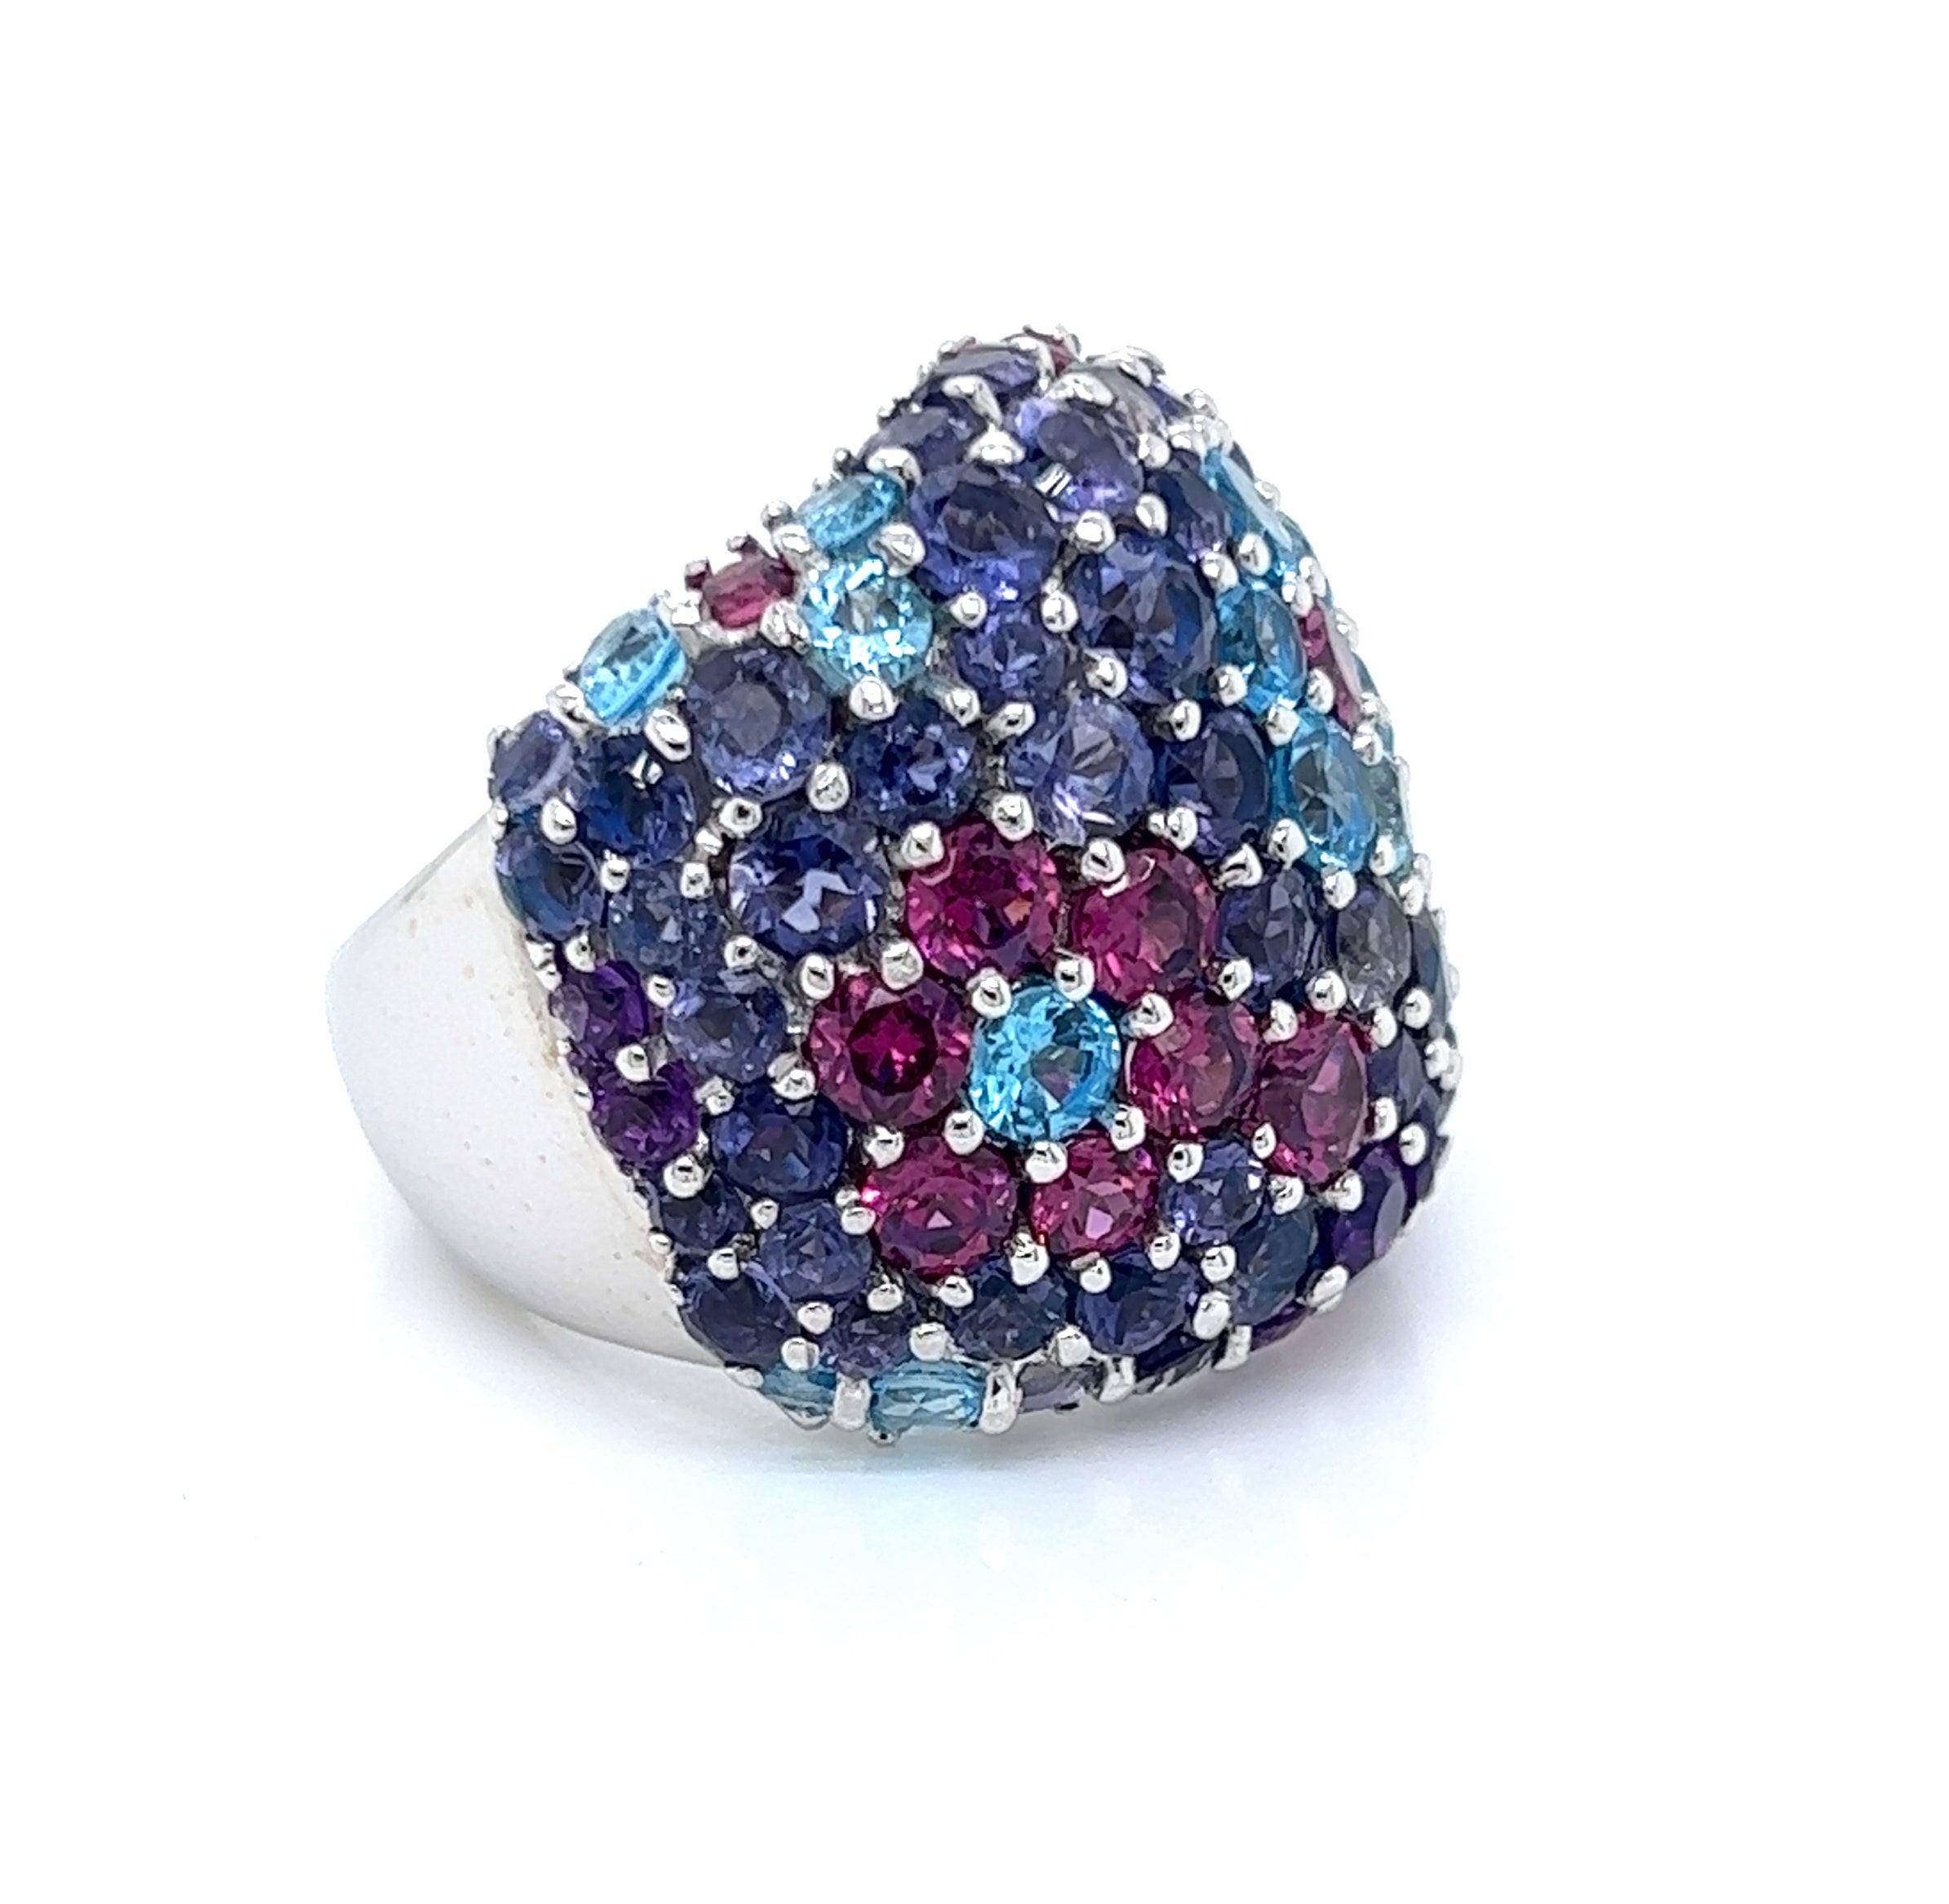 This is a stunning authentic large wide dome band ring by Pasquale Bruni, it is crafted from 18k white gold, it has iolite, blue topaz and rhodolite garnets mounted in prongs on the front of this 24mm wide dome ring. The blue topaz and garnets are